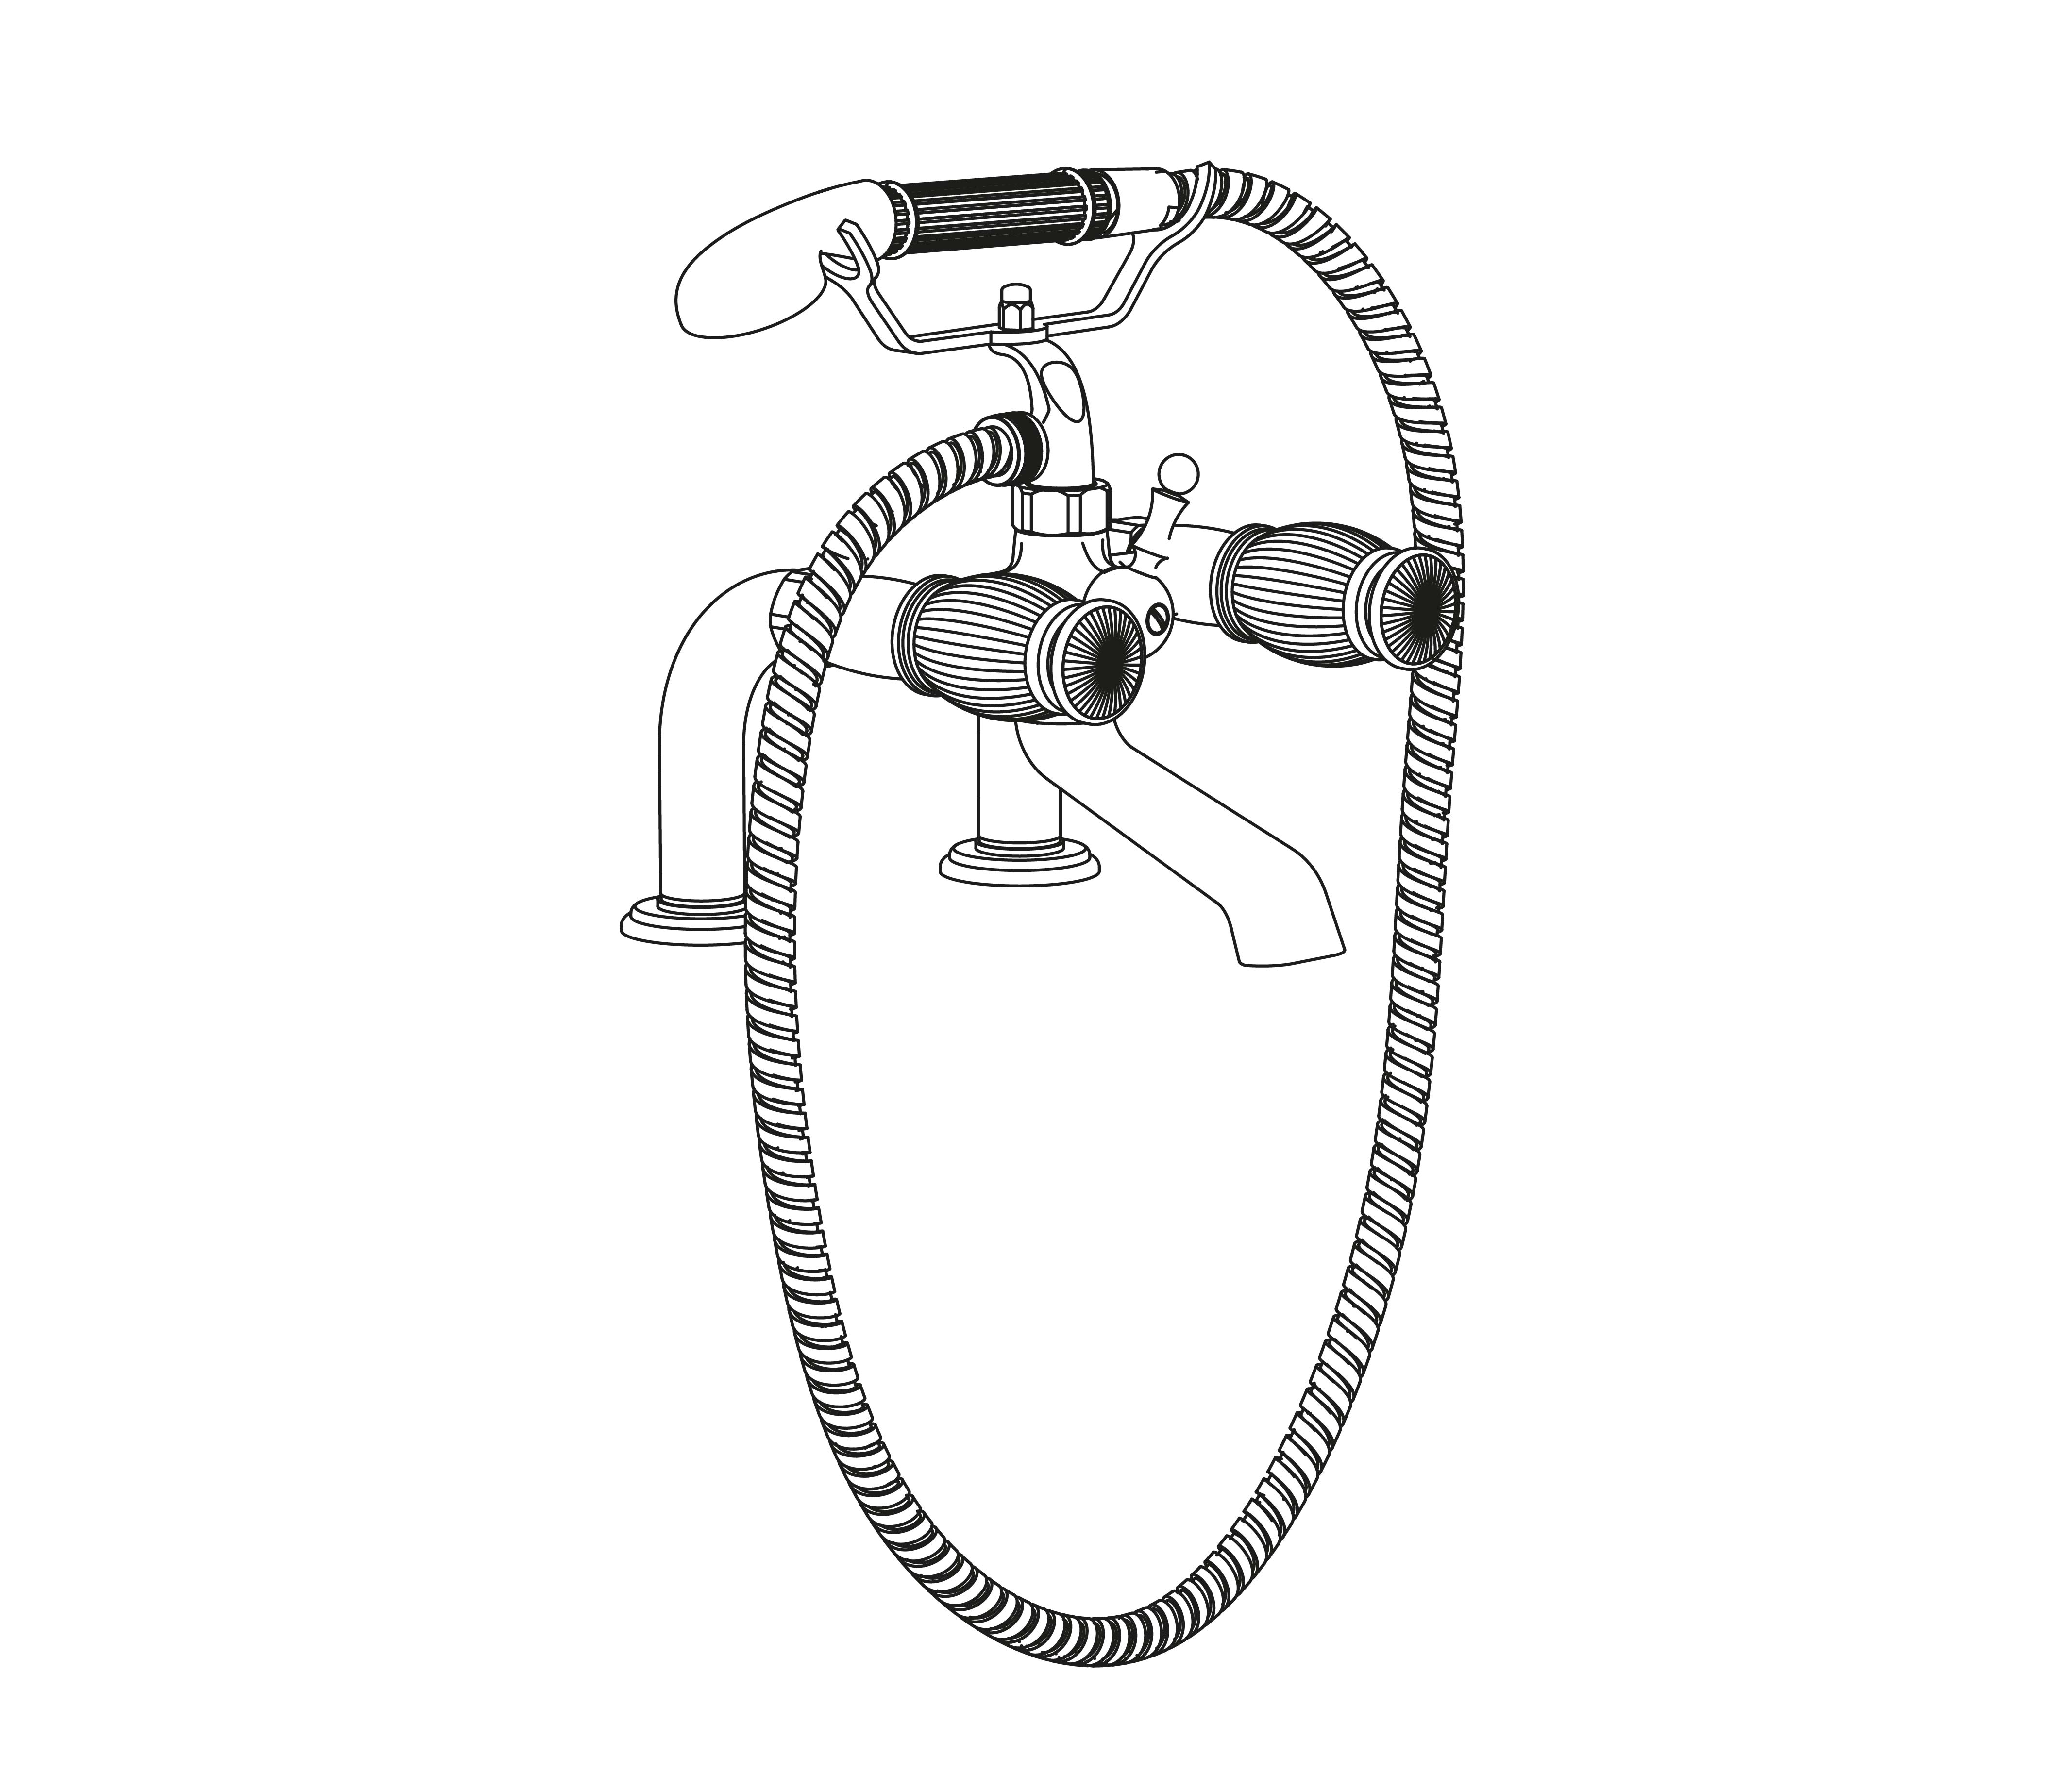 S149-3306 Rim mounted bath and shower mixer